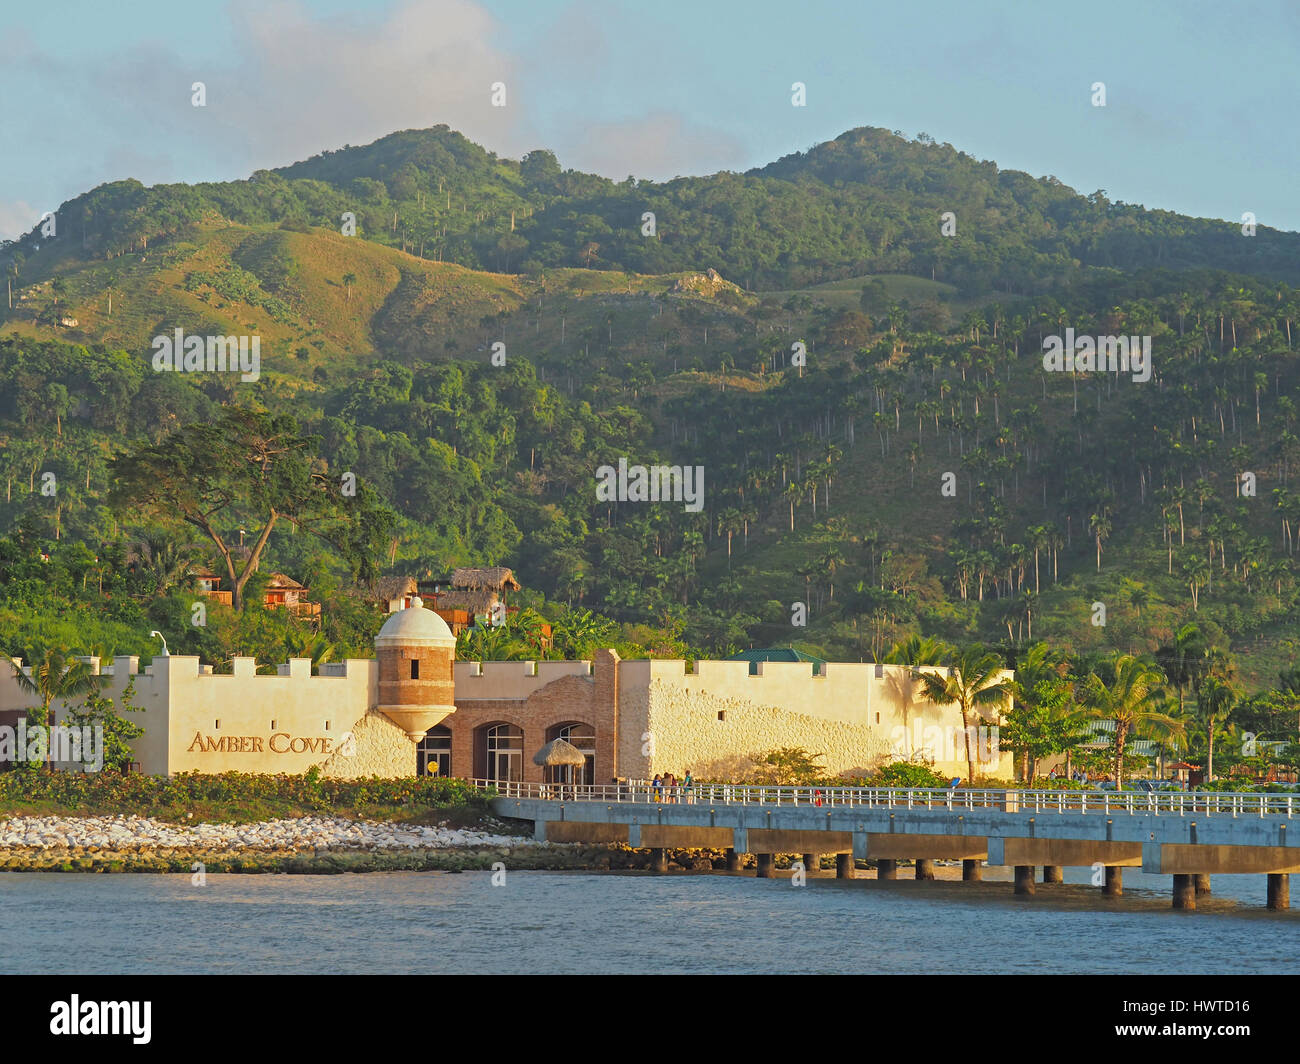 Entrance to Amber Cove cruise ship port at Puerto Plata, Dominican Republic. Stock Photo